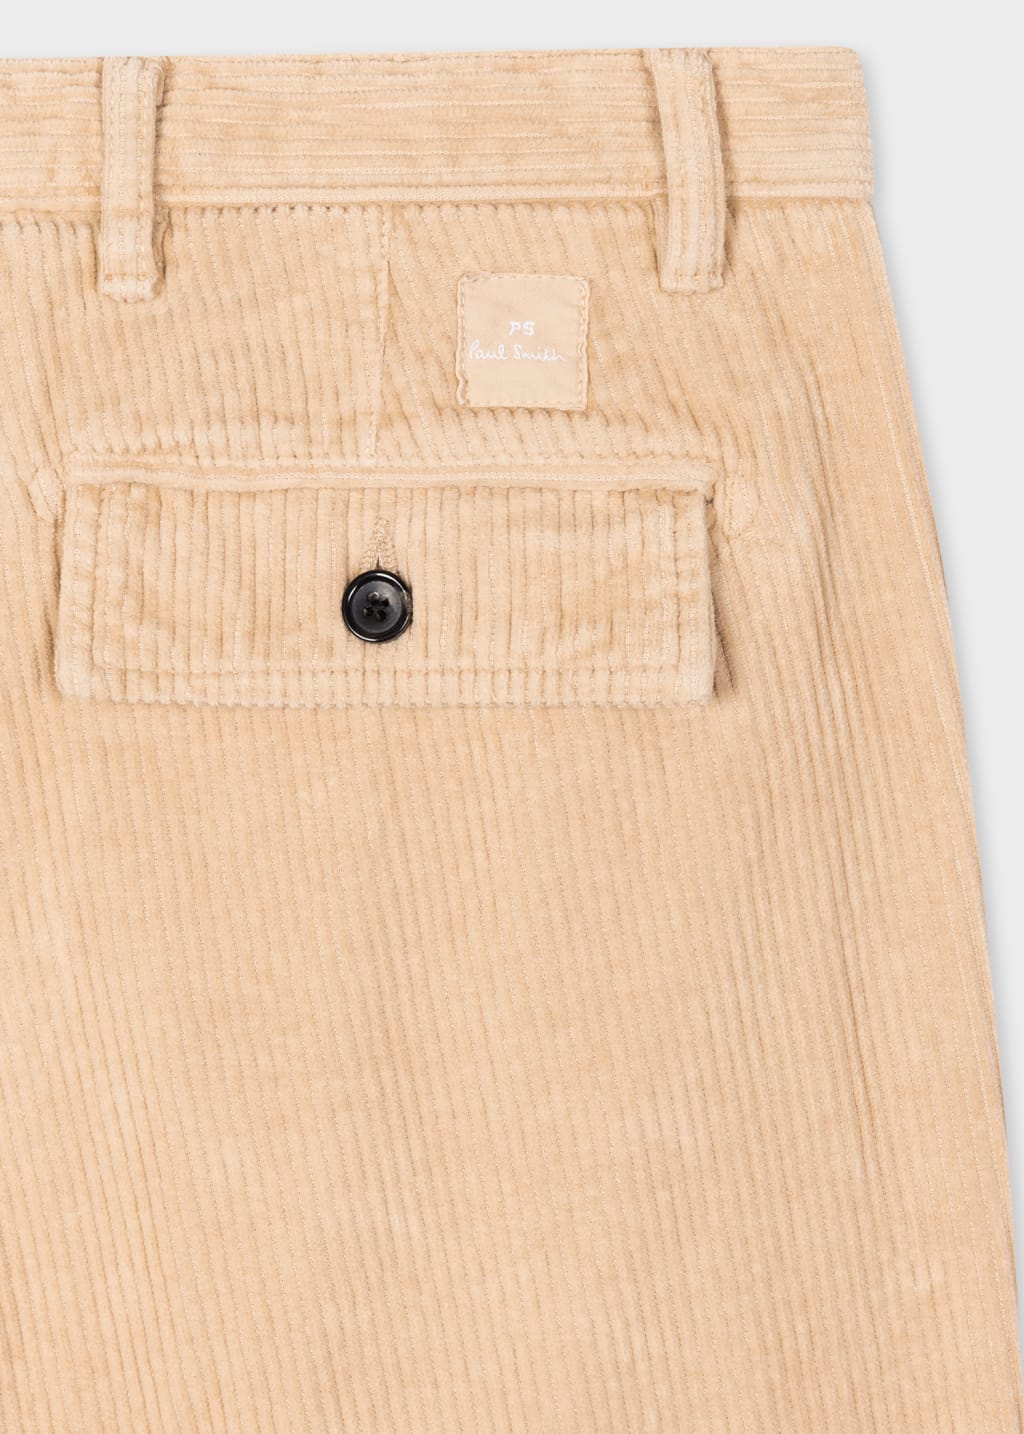 Detail View - Loose-Fit Light Tan Corduroy Trousers Paul Smith